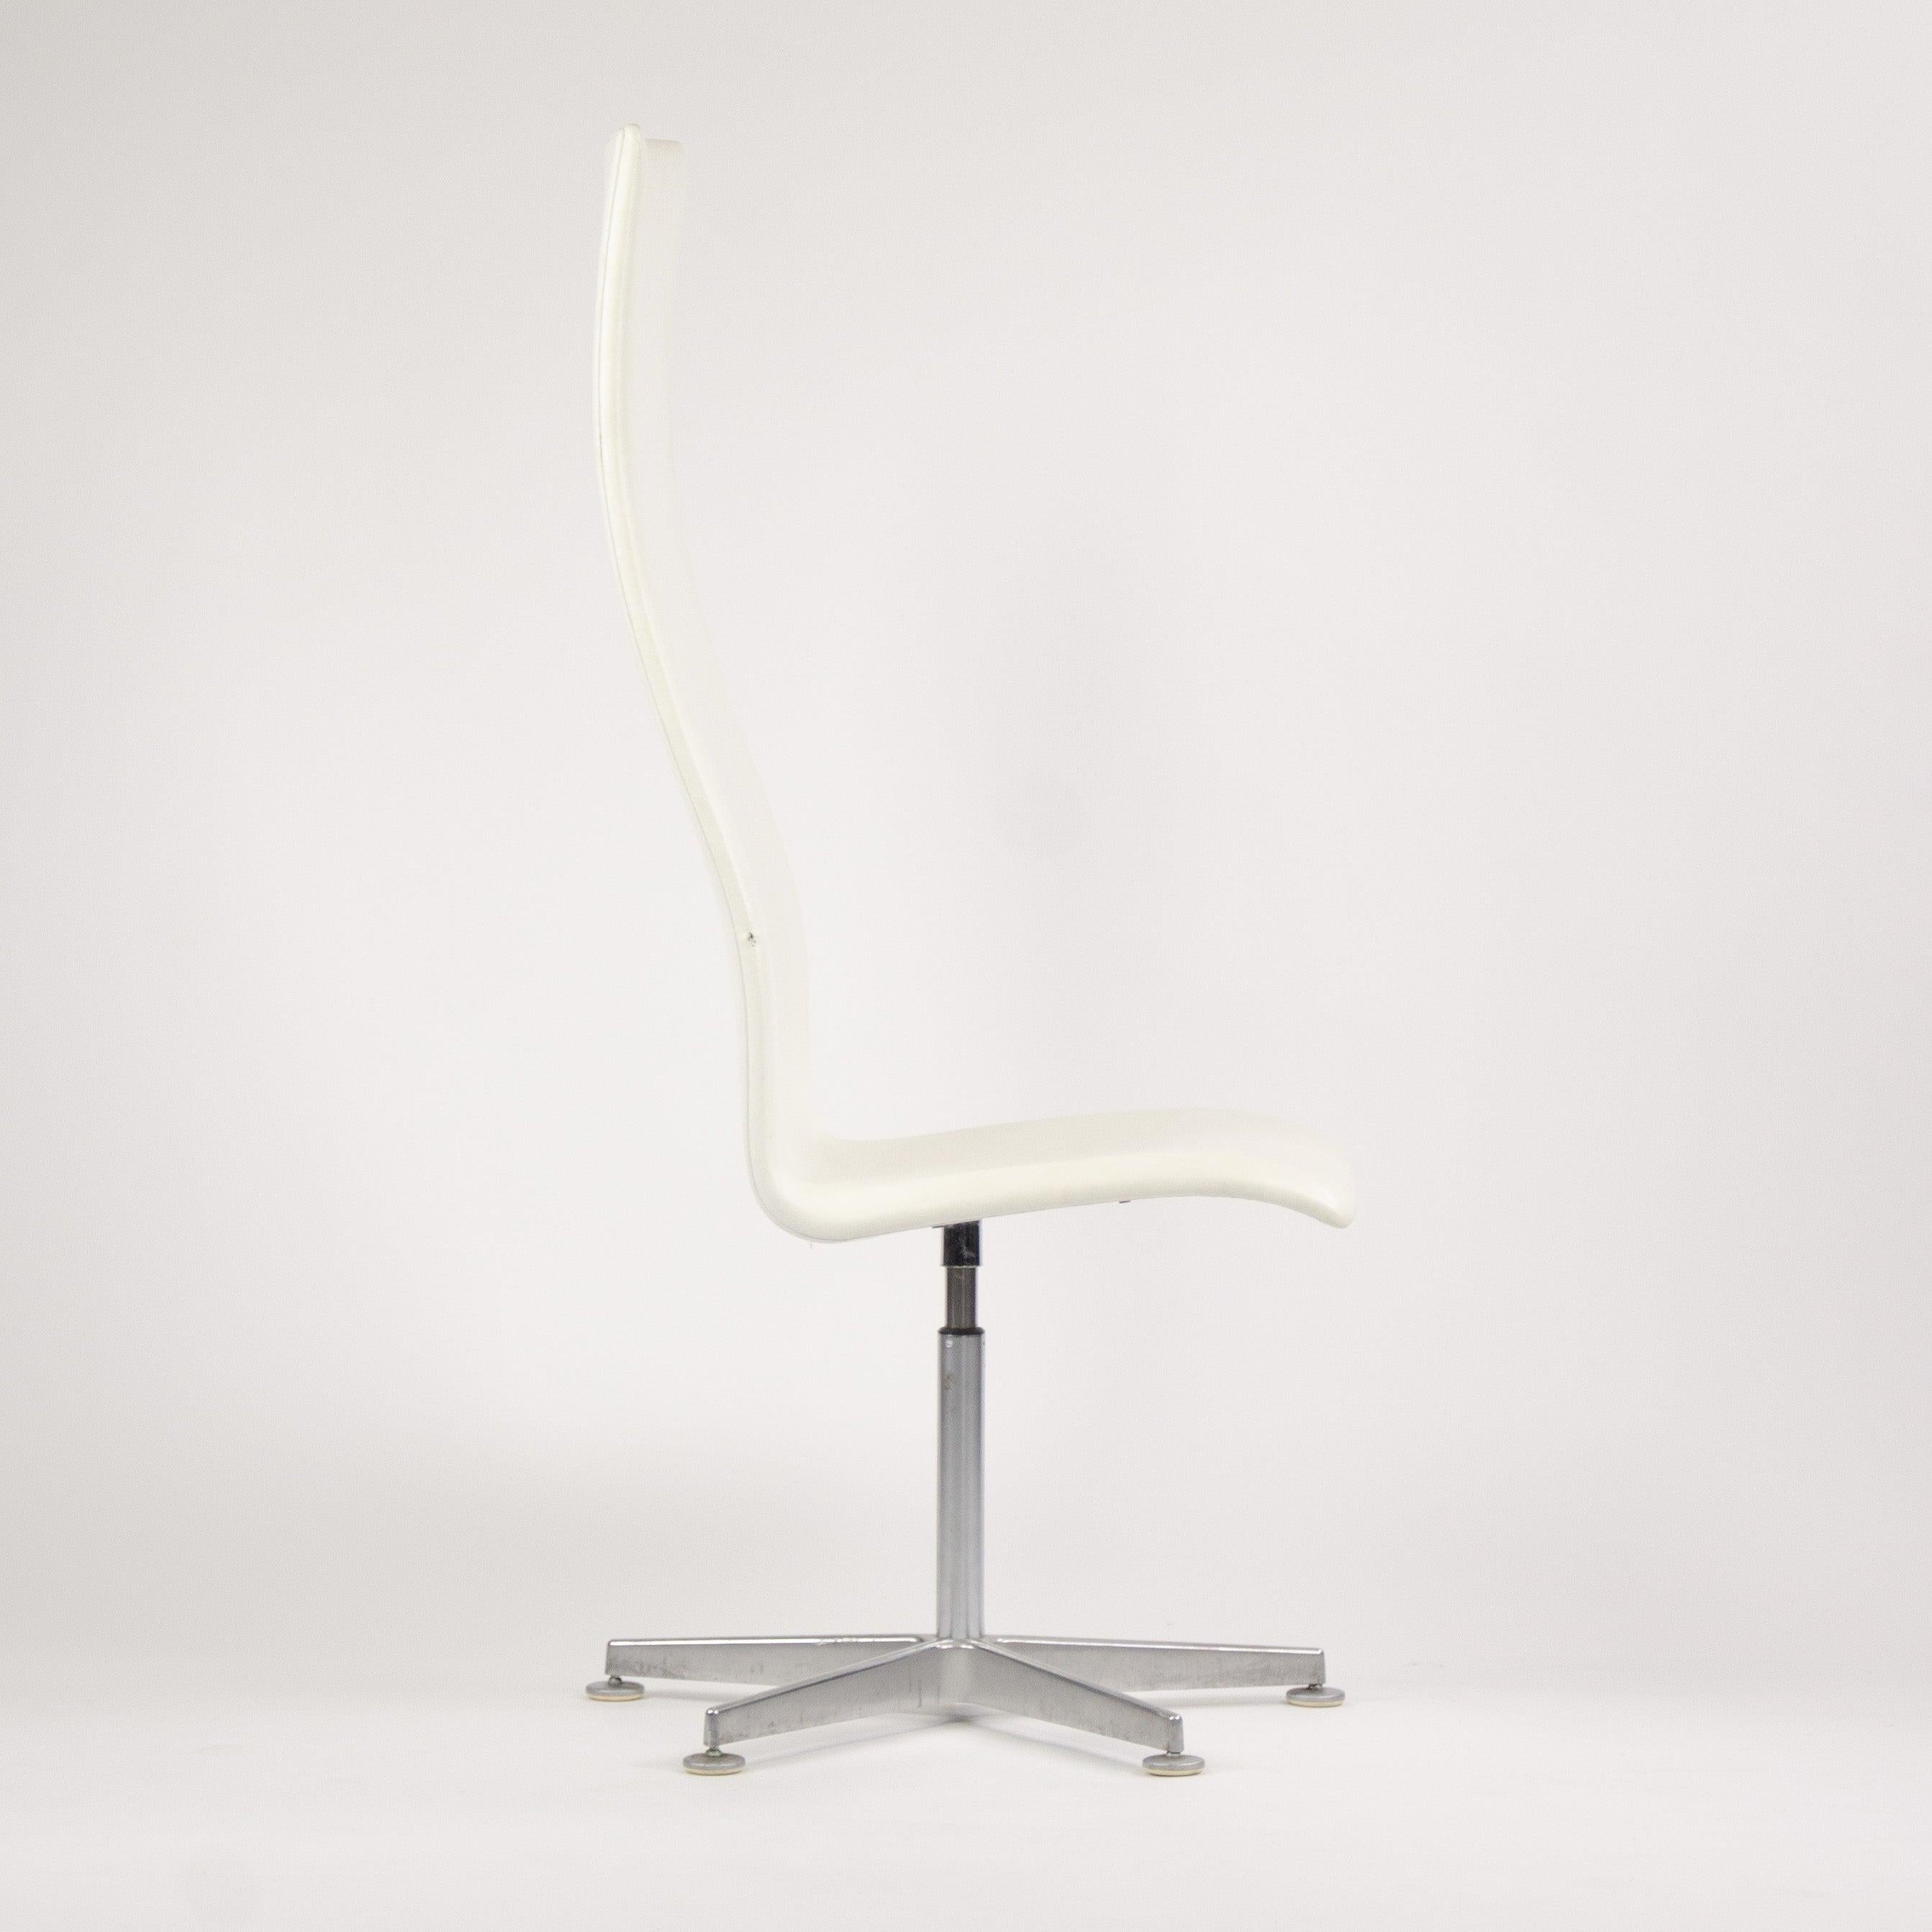 Fritz Hansen Arne Jacobsen Tall Oxford Chair White Leather 2007 4x Available For Sale 2